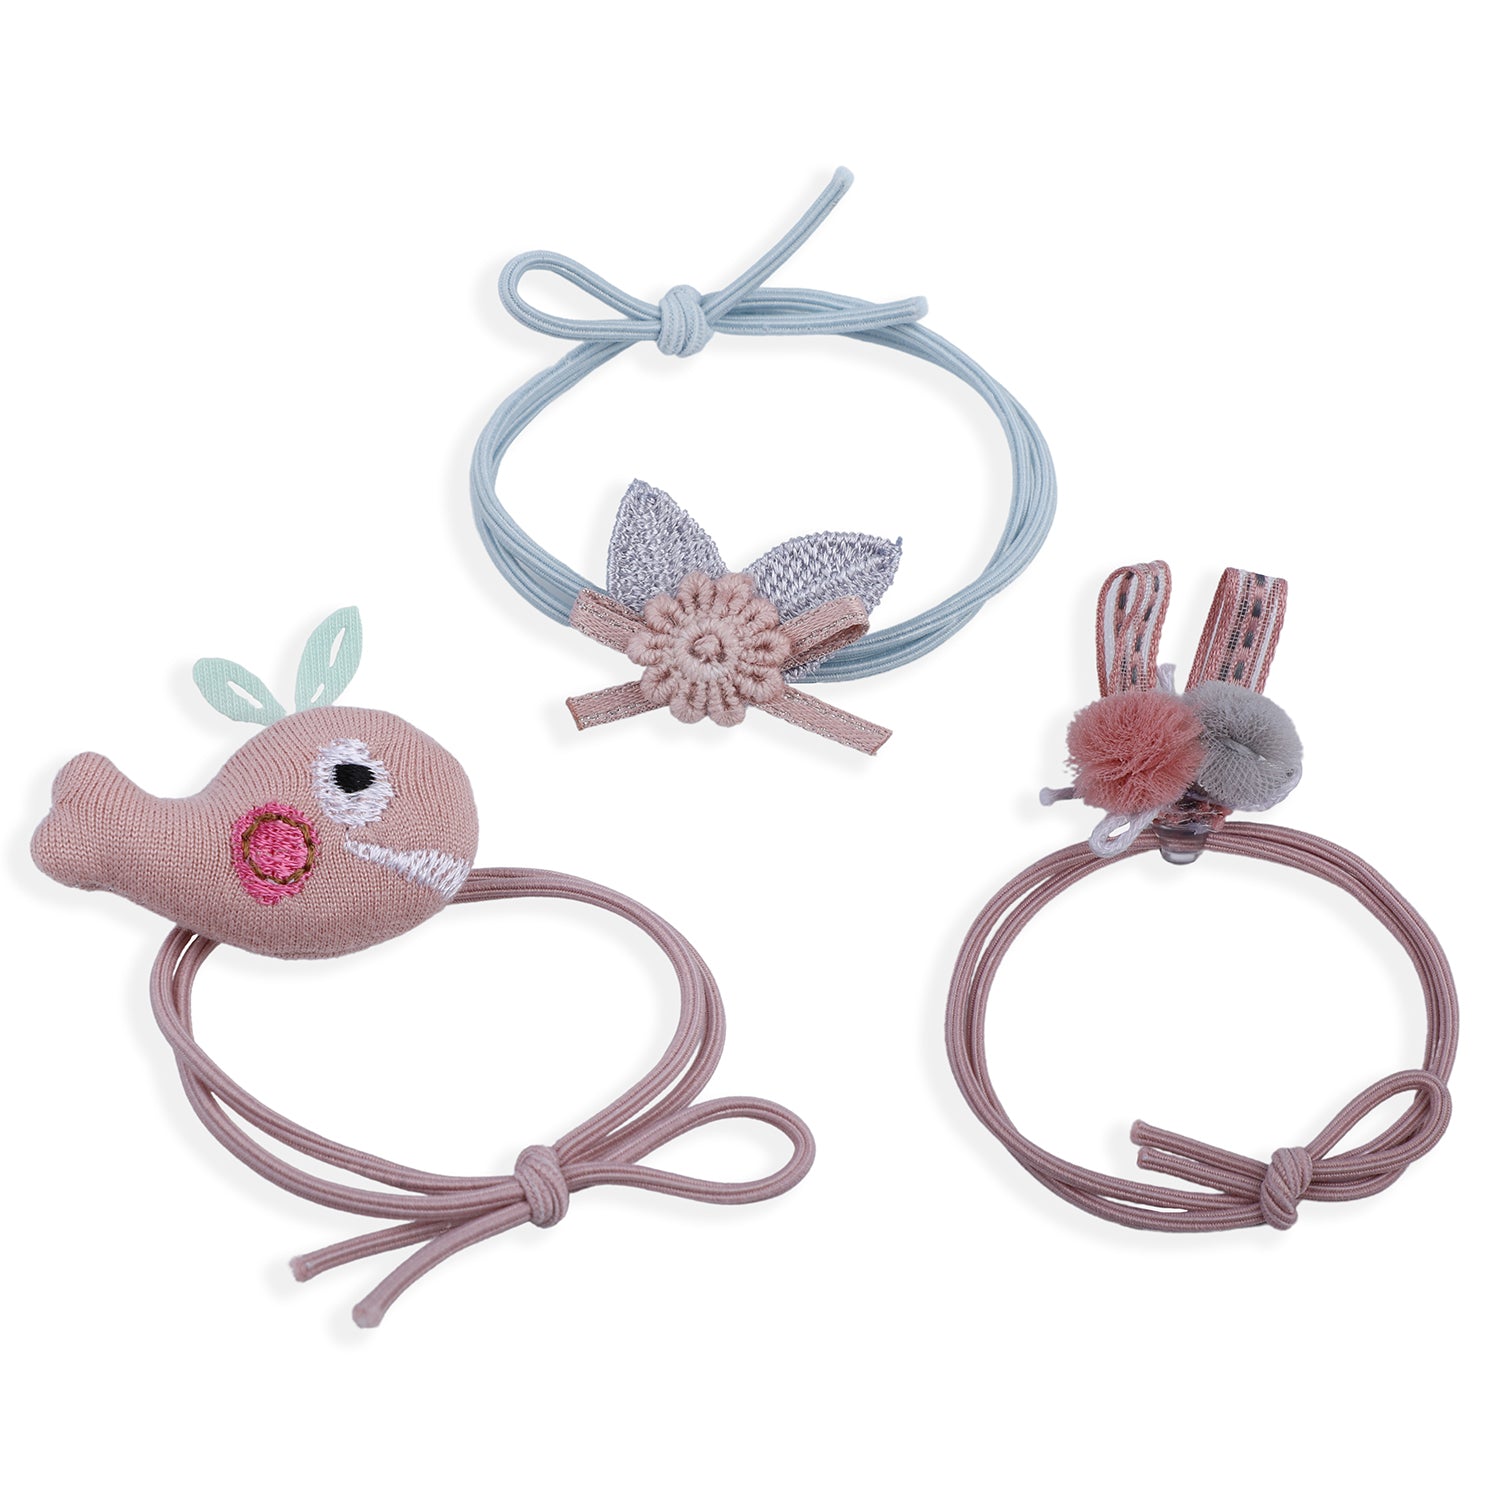 Whale Rubber Bands Hair Accessories 3 Pcs - Pink